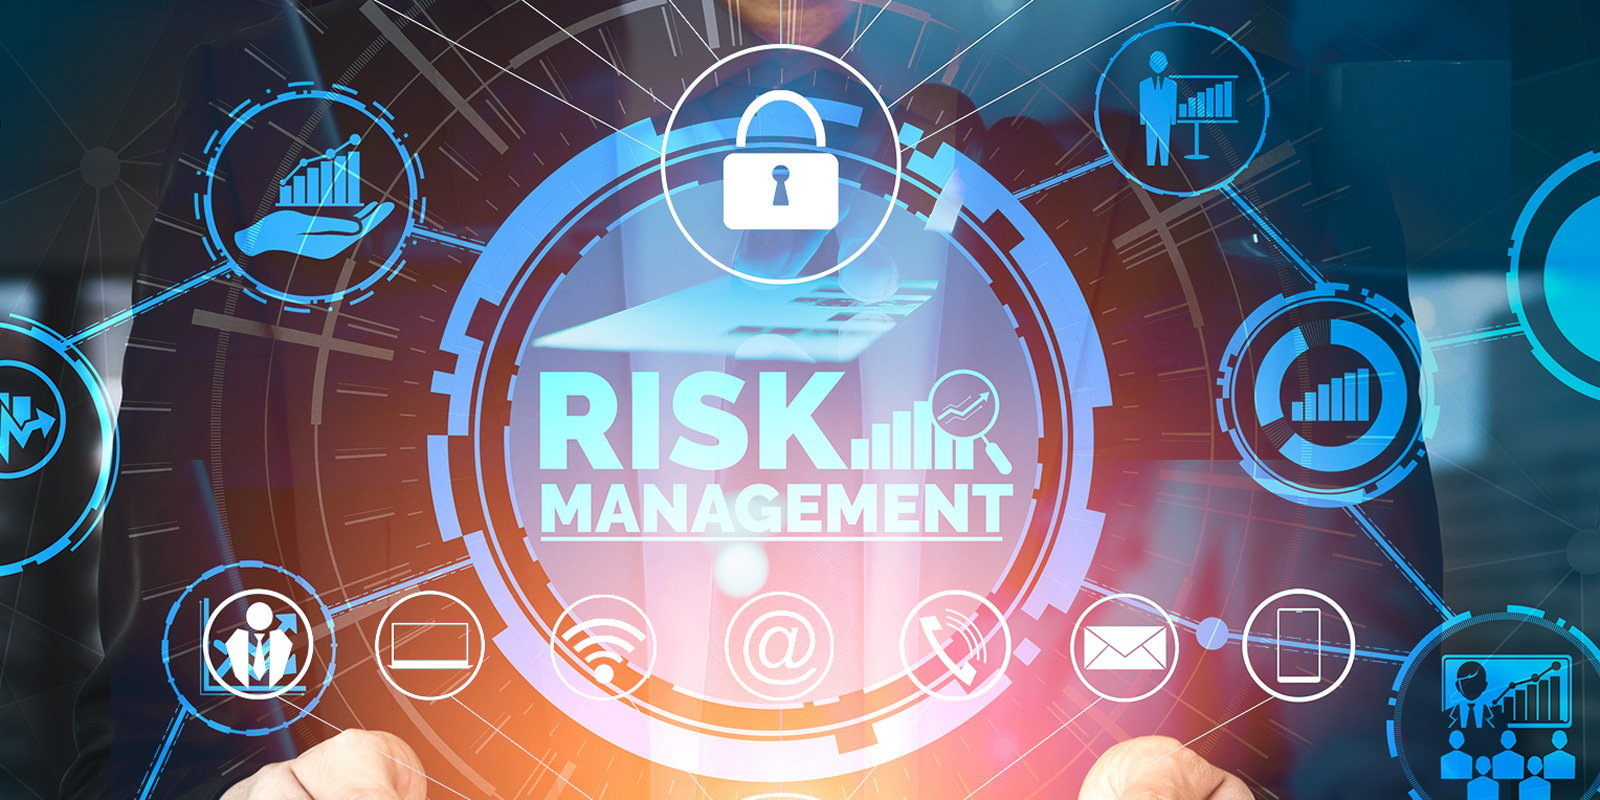 Cybersecurity Risk Management Why Does It Matter